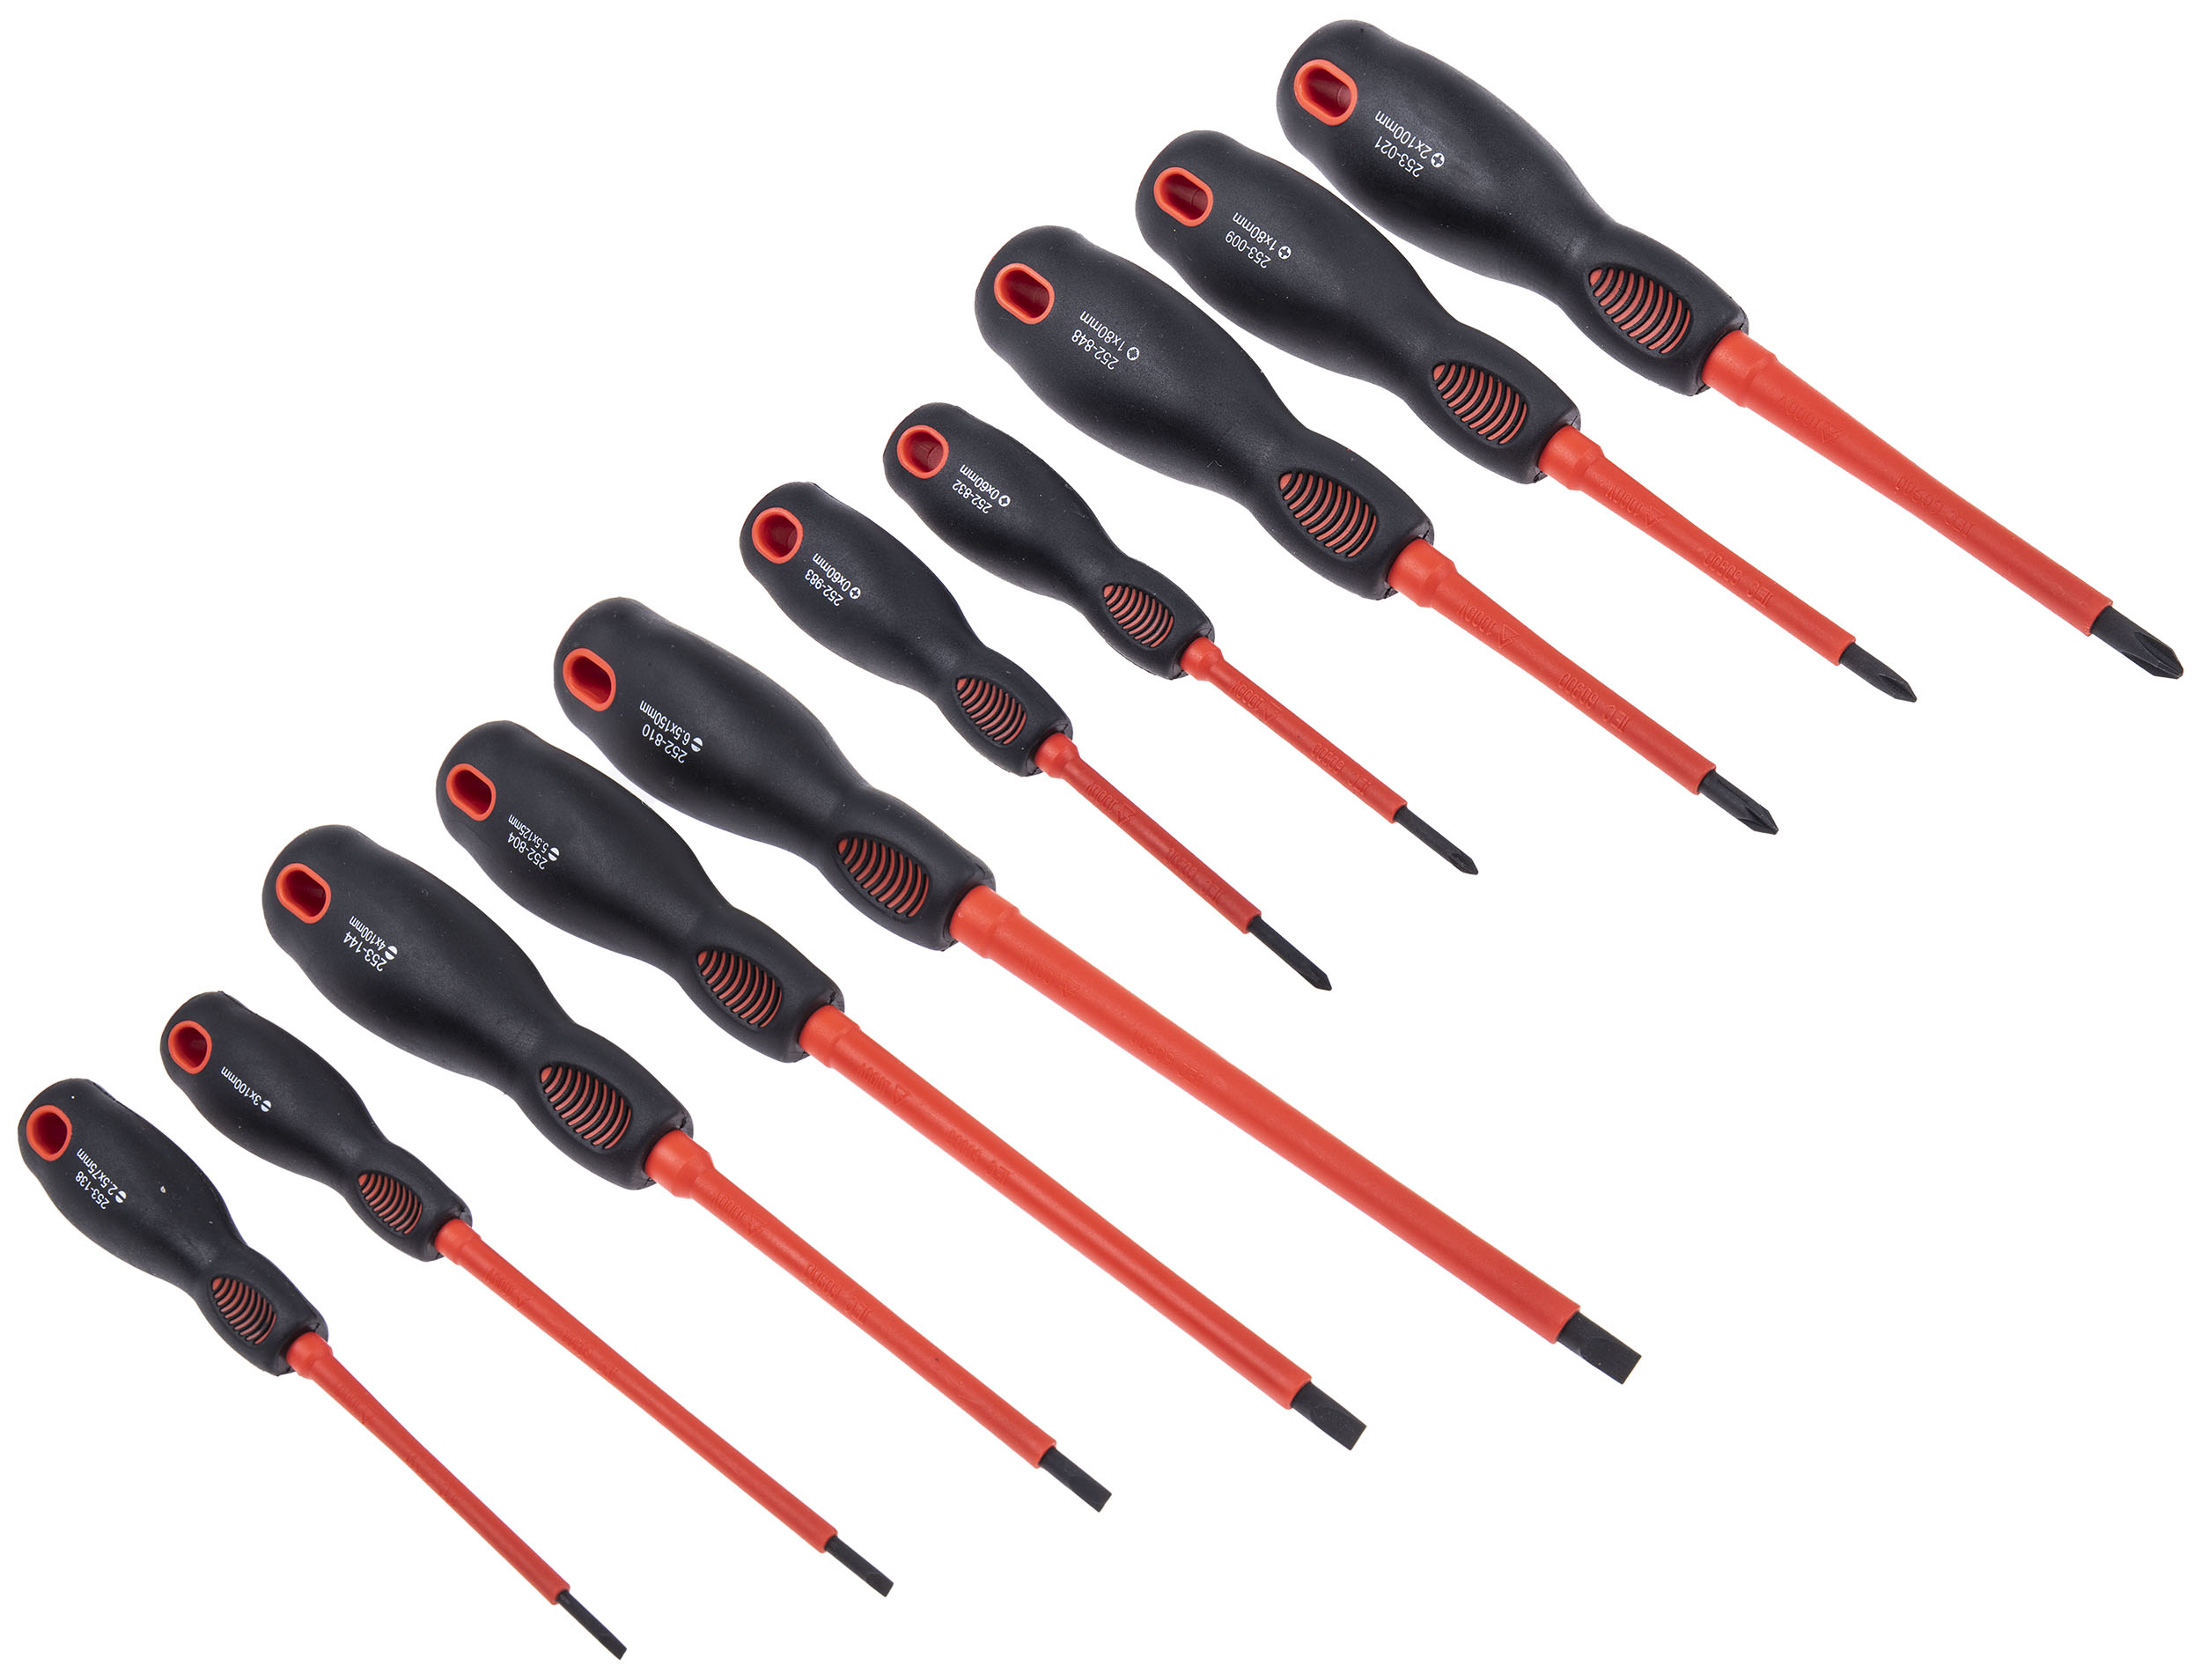 10 Screwdriver Types You Need in Your Toolbox